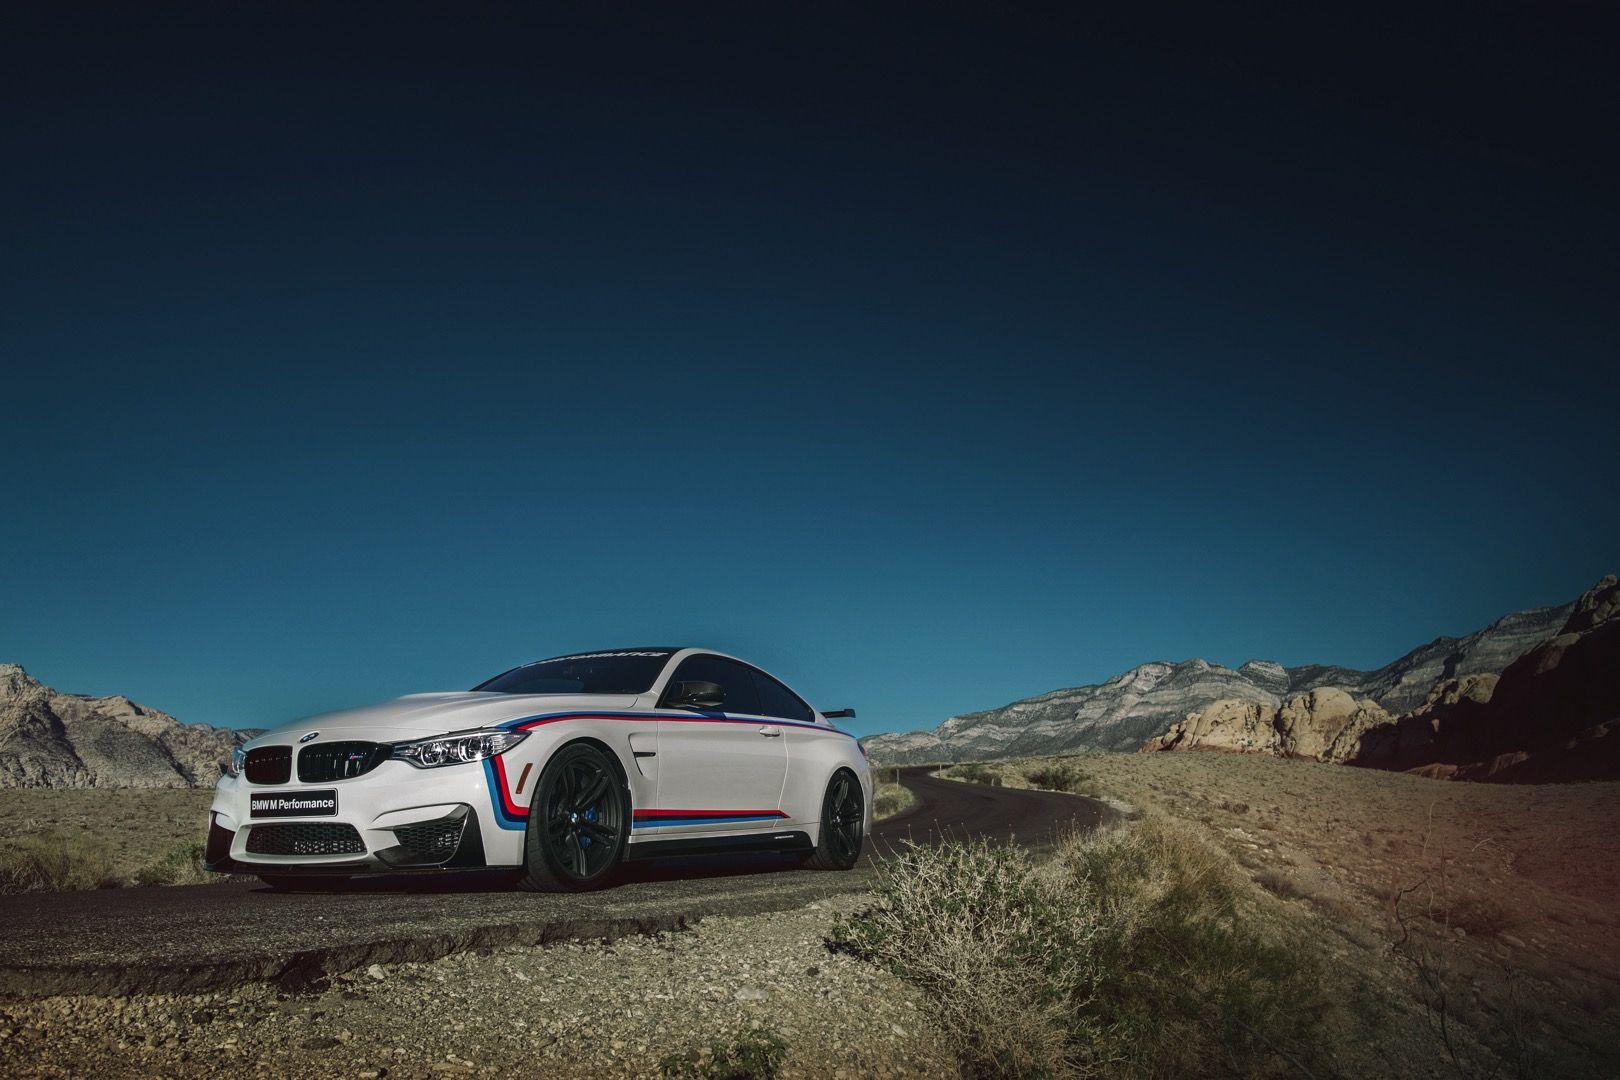 BMW M4 with M Performance Parts Wallpaper: The Thirst for Performance Is Real